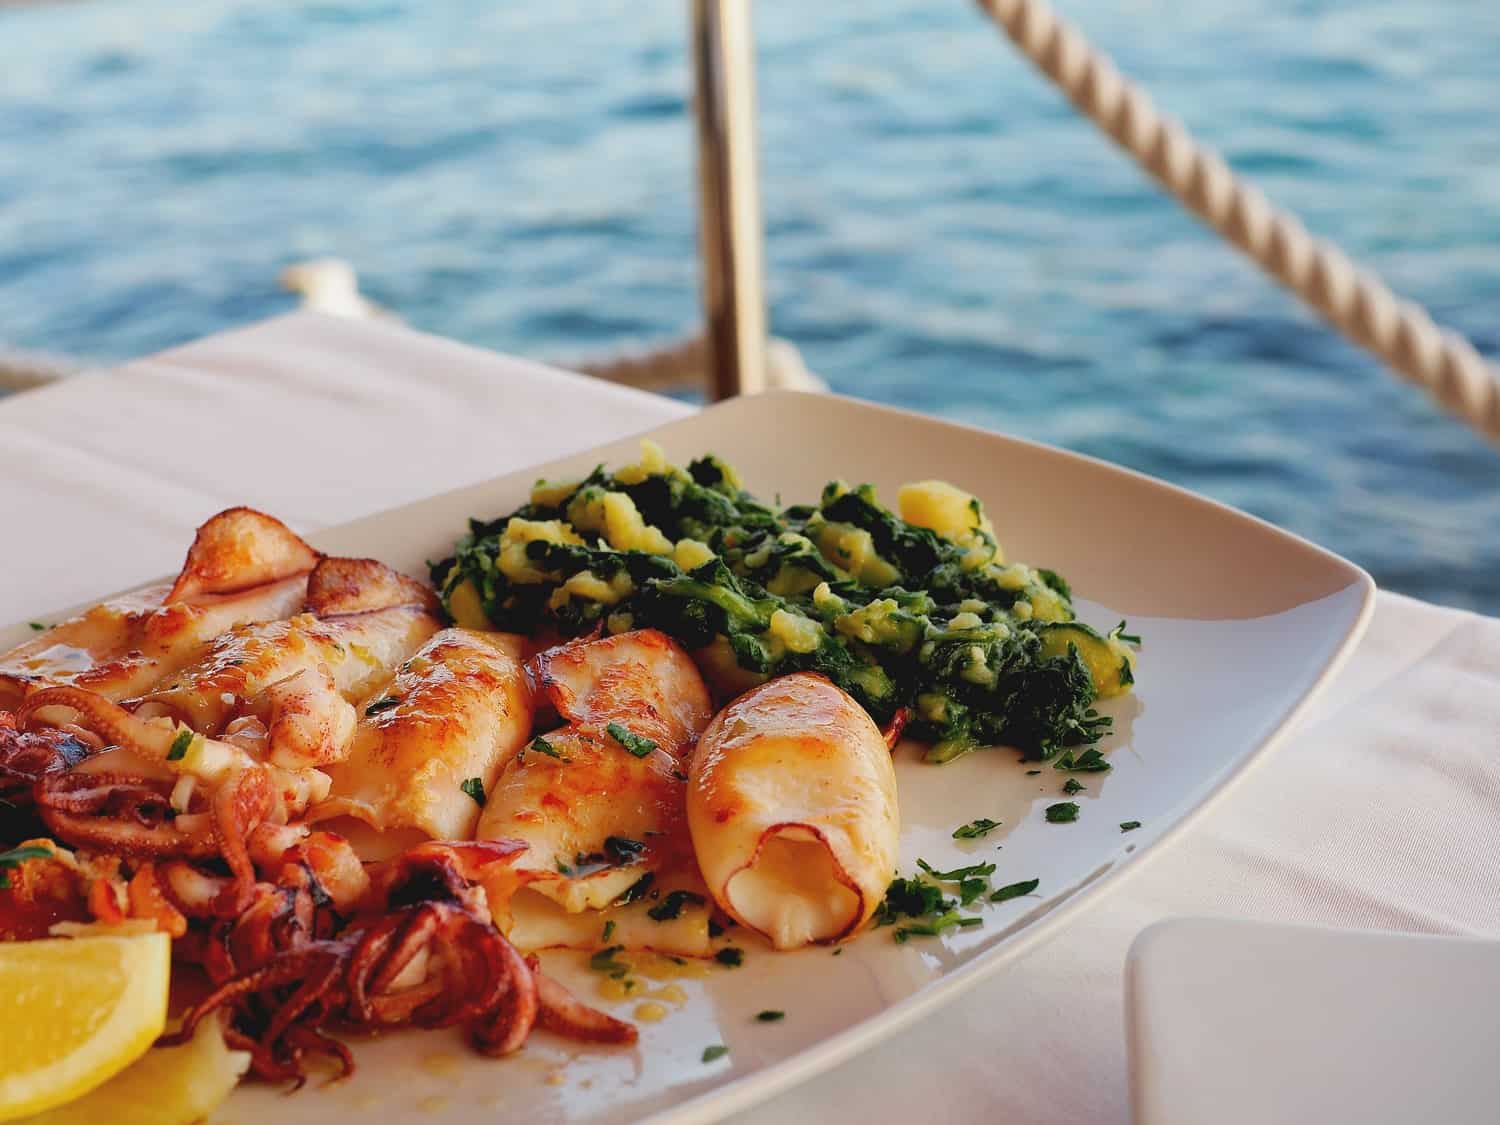 Plate of seafood on a table with a white tablecloth, beside the ocean in Croatia